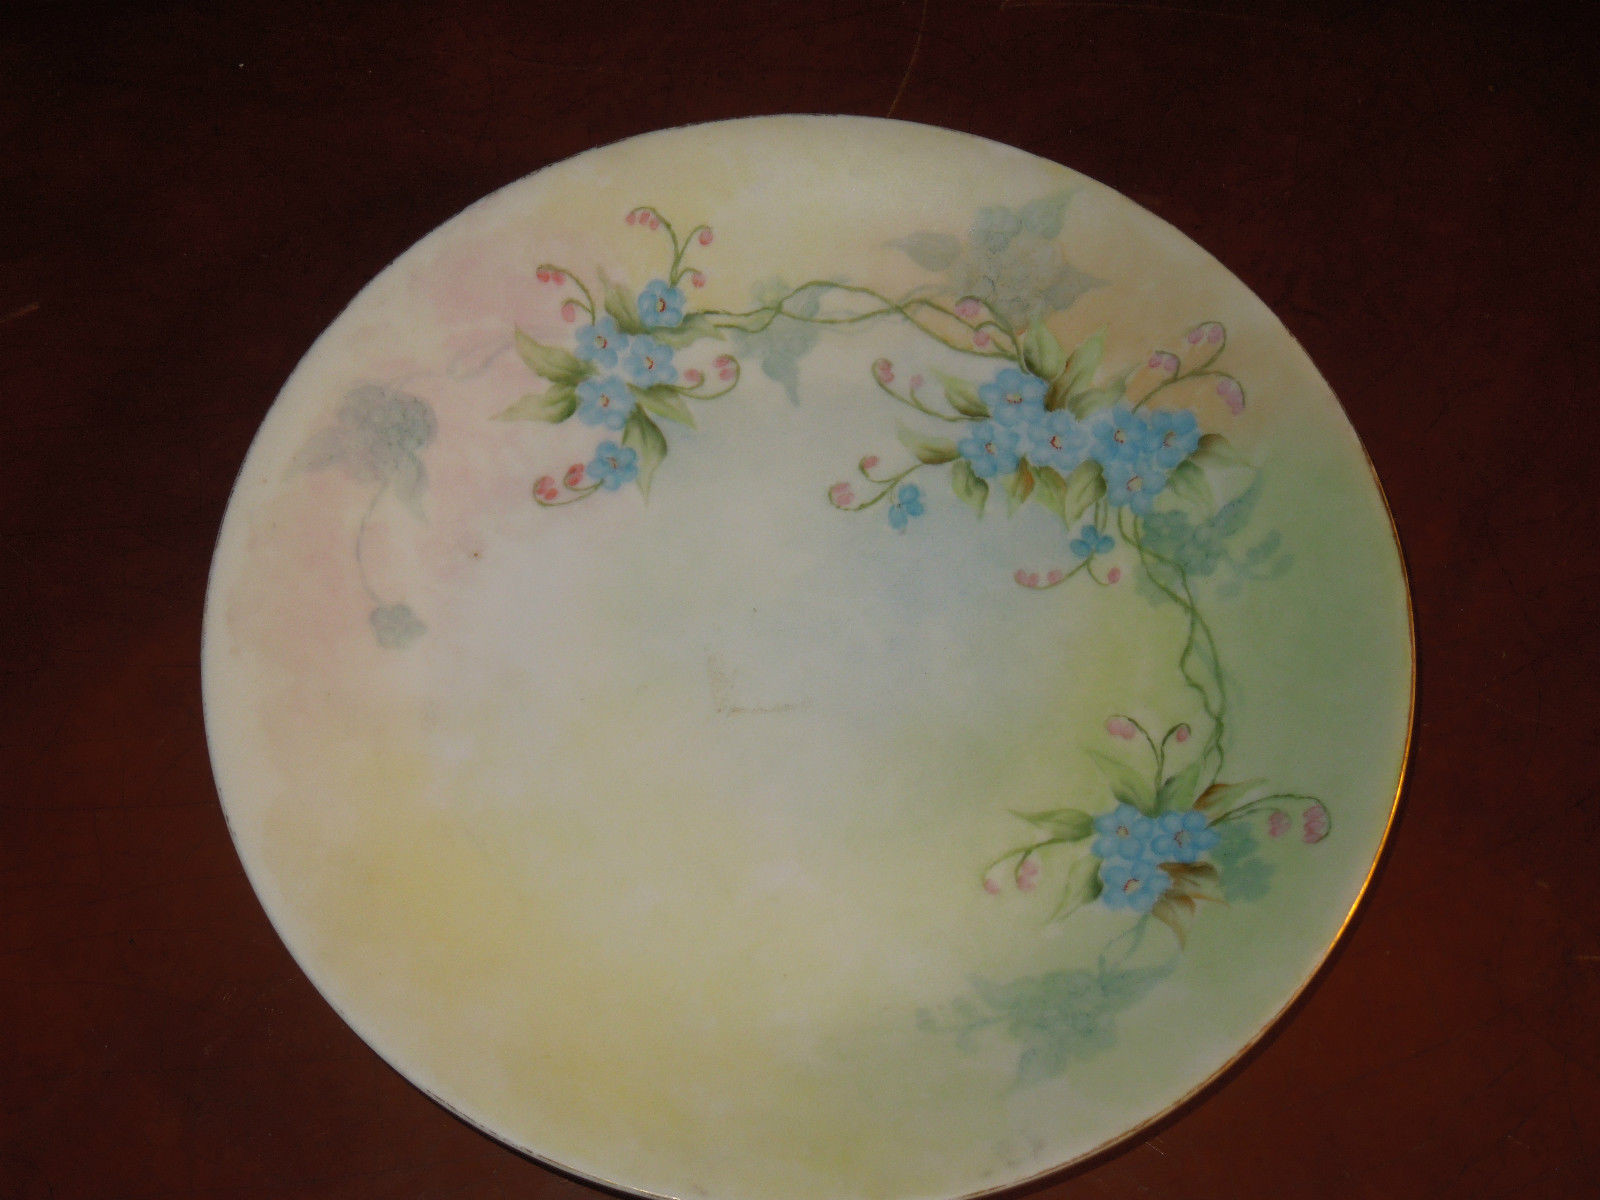 27 Awesome Limoges Vase Prices 2024 free download limoges vase prices of dc limoges france hand painted plate mark 3 1894 1900 vintage with dc limoges france hand painted plate mark 3 1894 1900 vintage 1 of 2only 1 available dc limoges